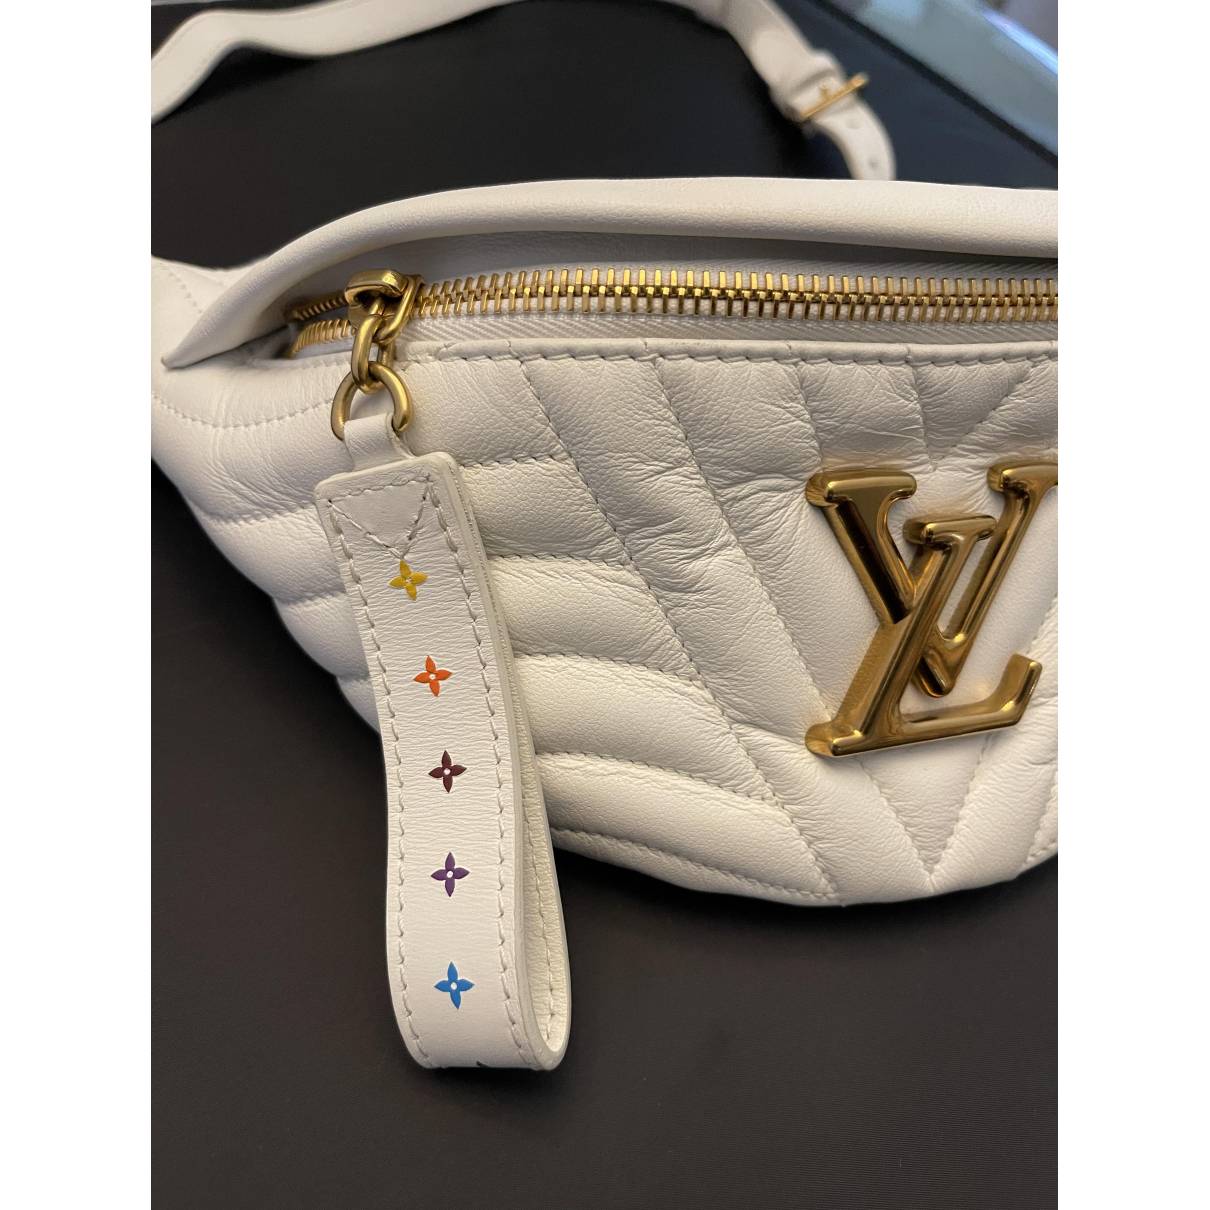 Louis Vuitton - Authenticated New Wave Handbag - Leather White Plain for Women, Very Good Condition